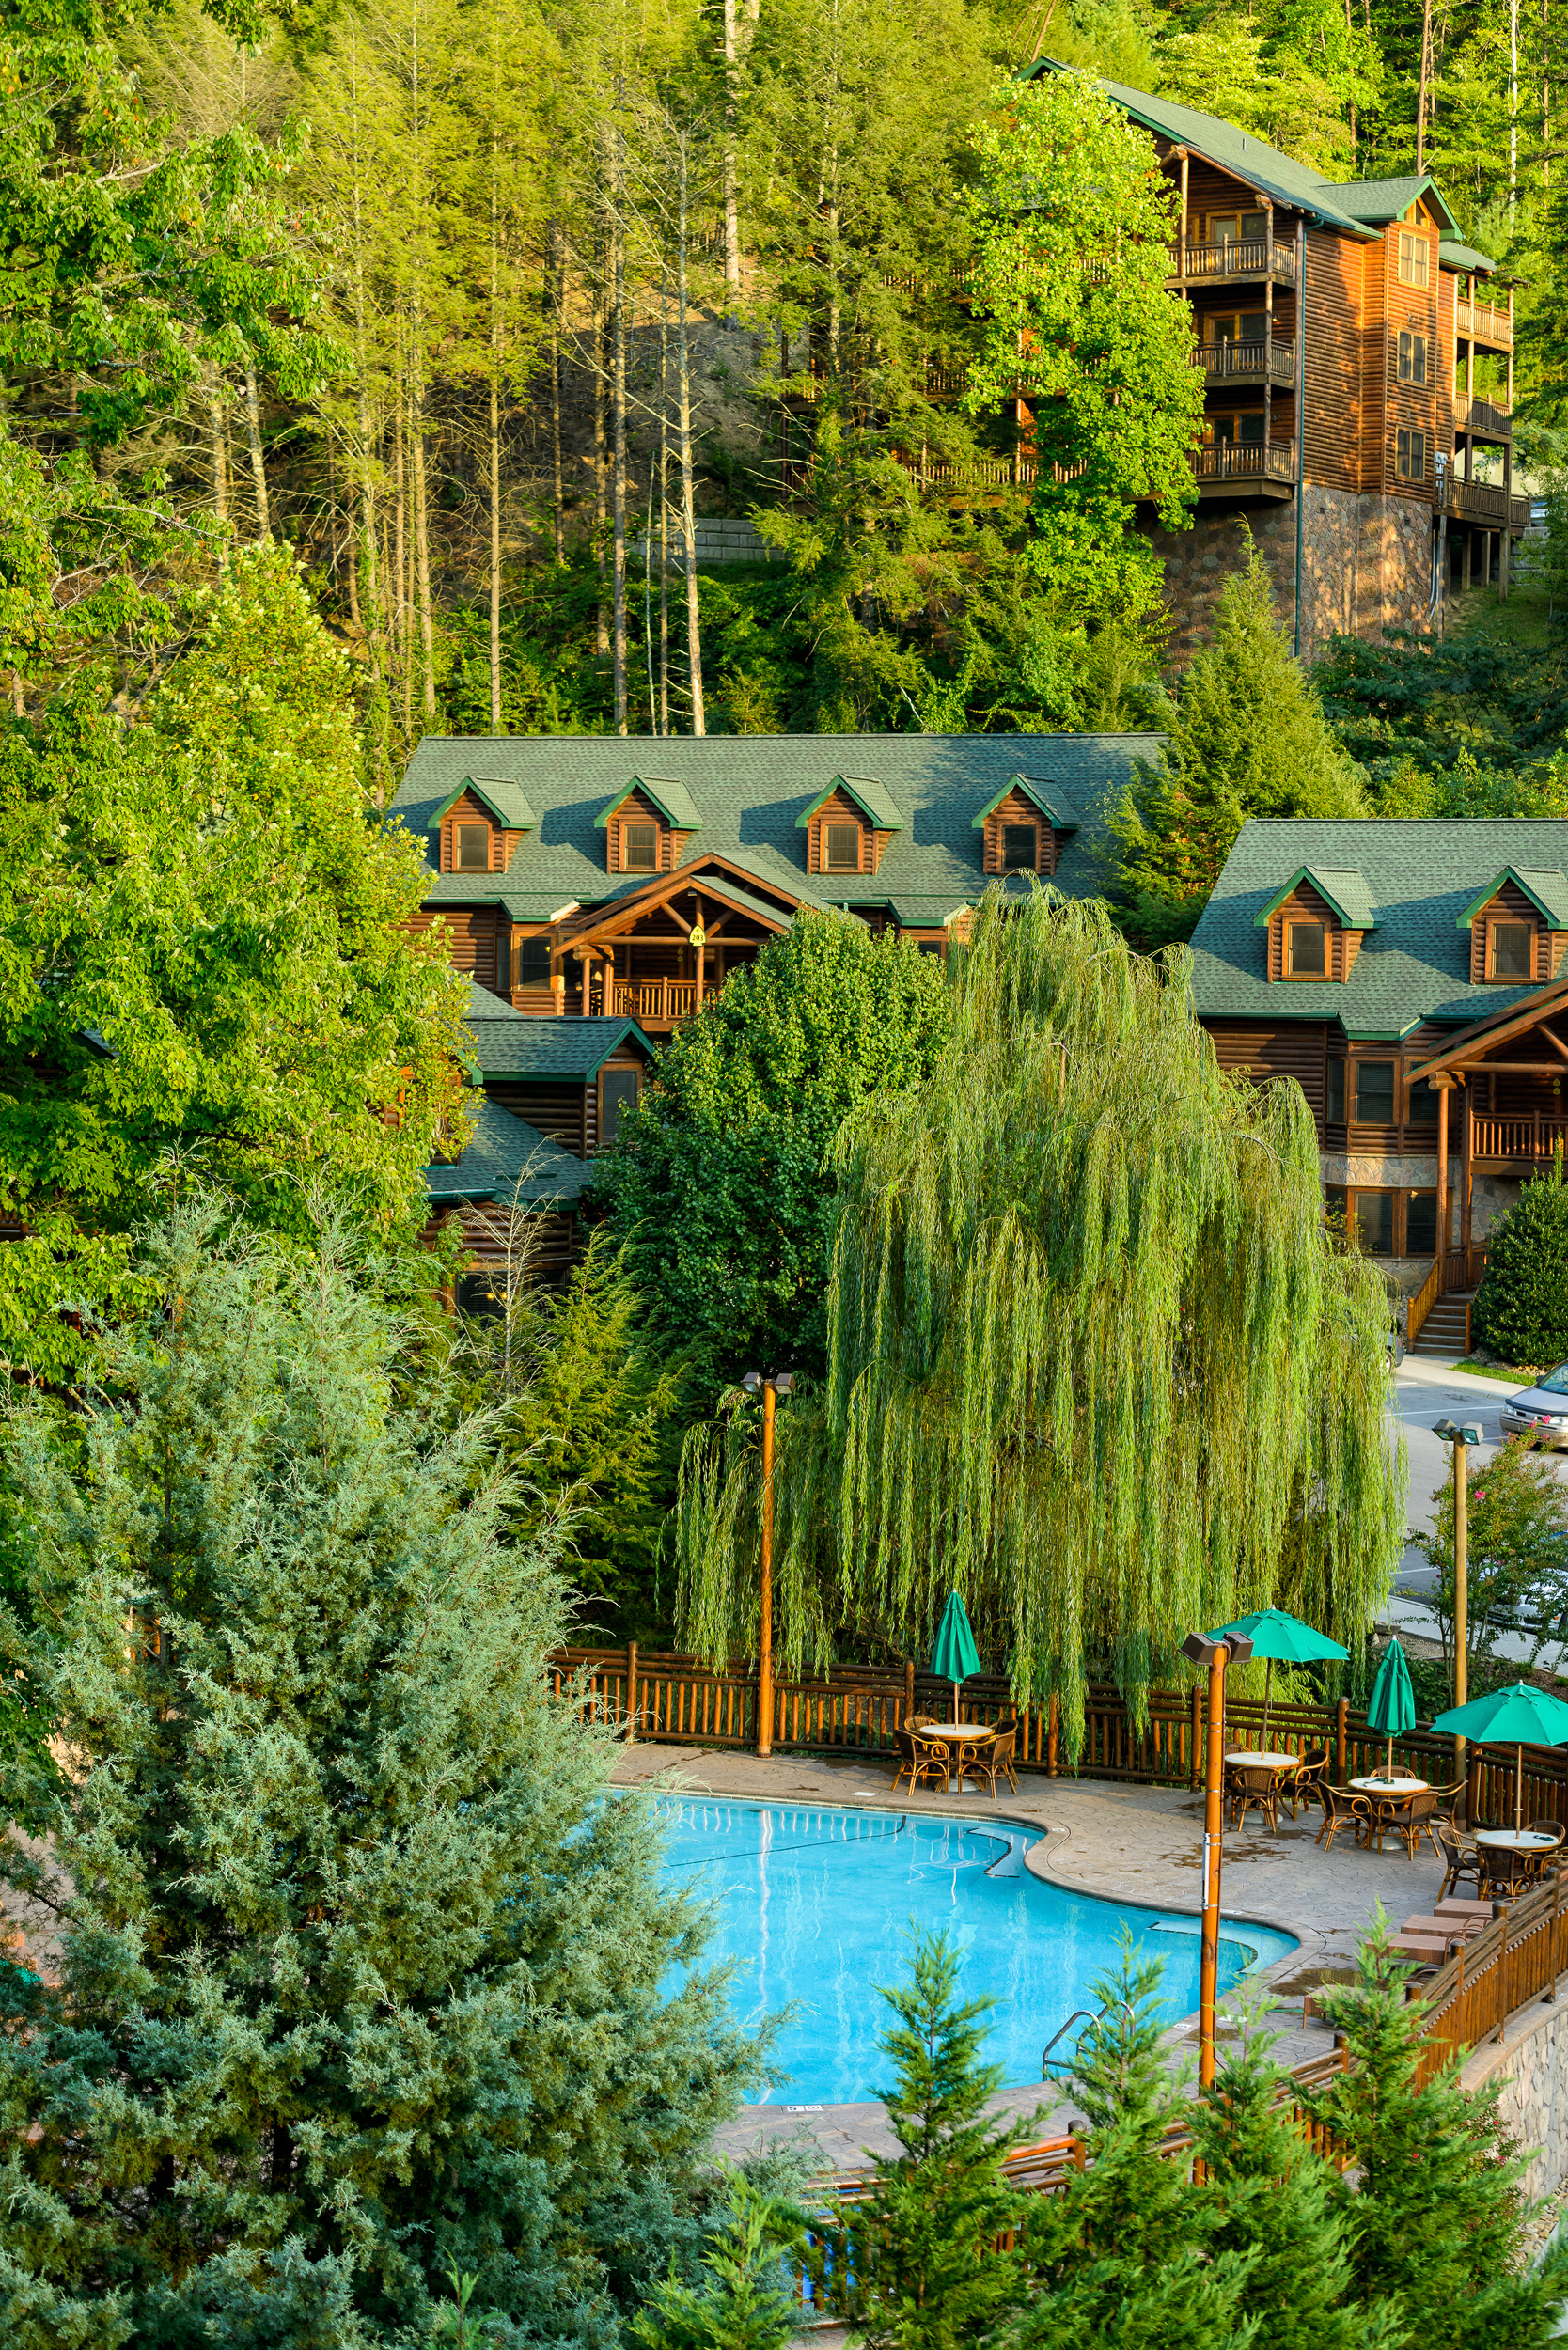 Westgate Smoky Mountain Resort & Water Park - Couples Massage Gatlinburg TN Vacation Package for $99 in The Smokies